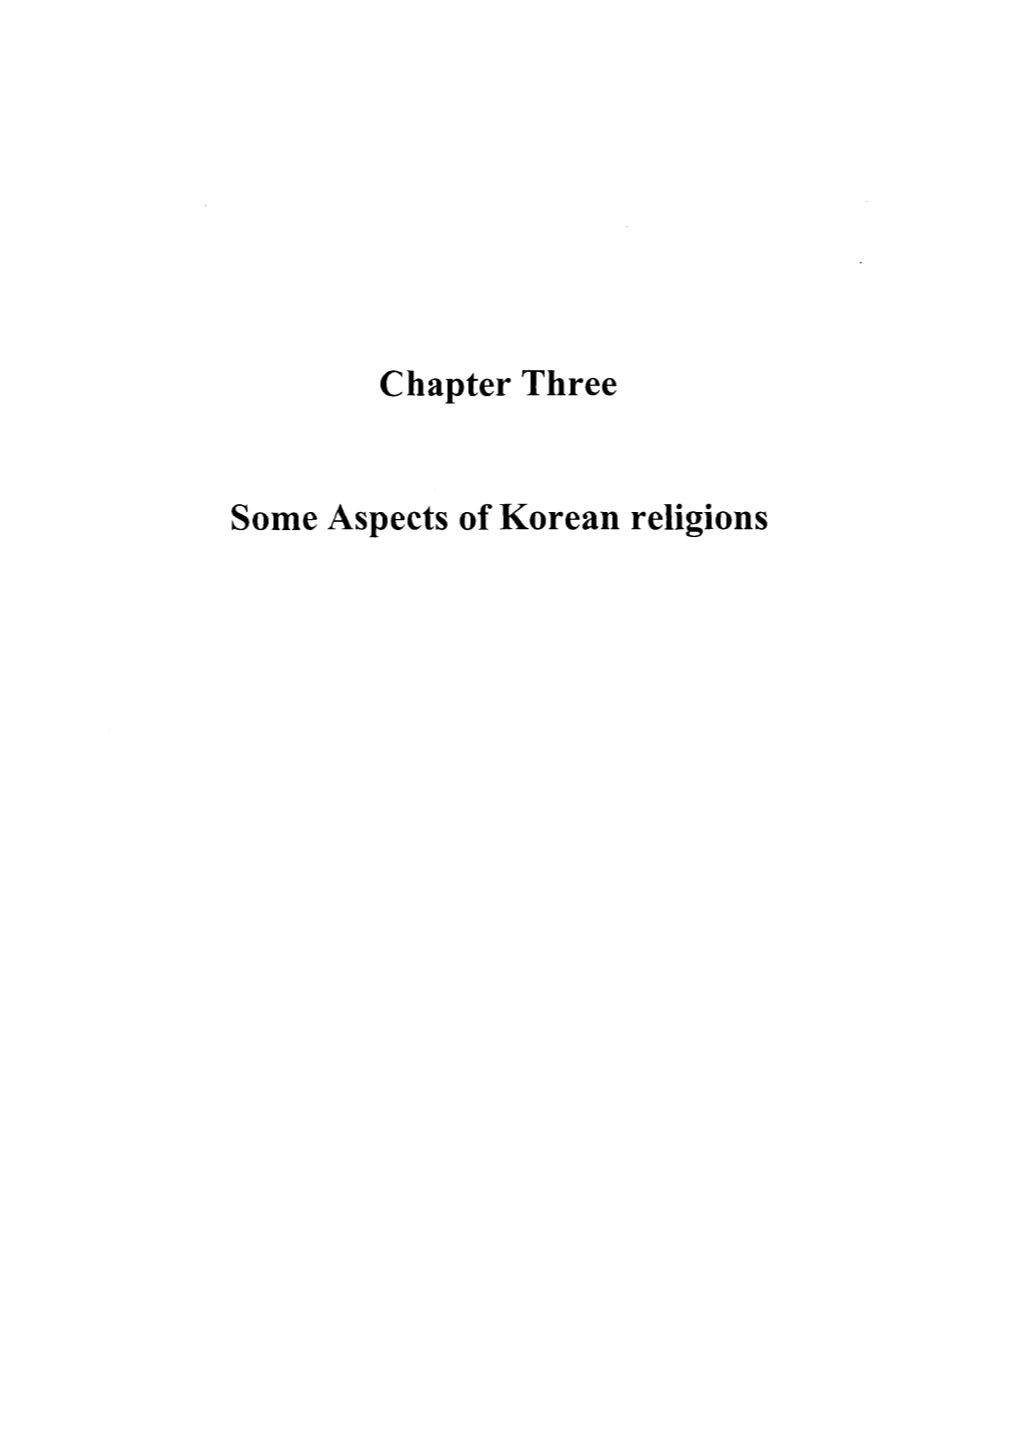 Chapter Three Some Aspects of Korean Religions